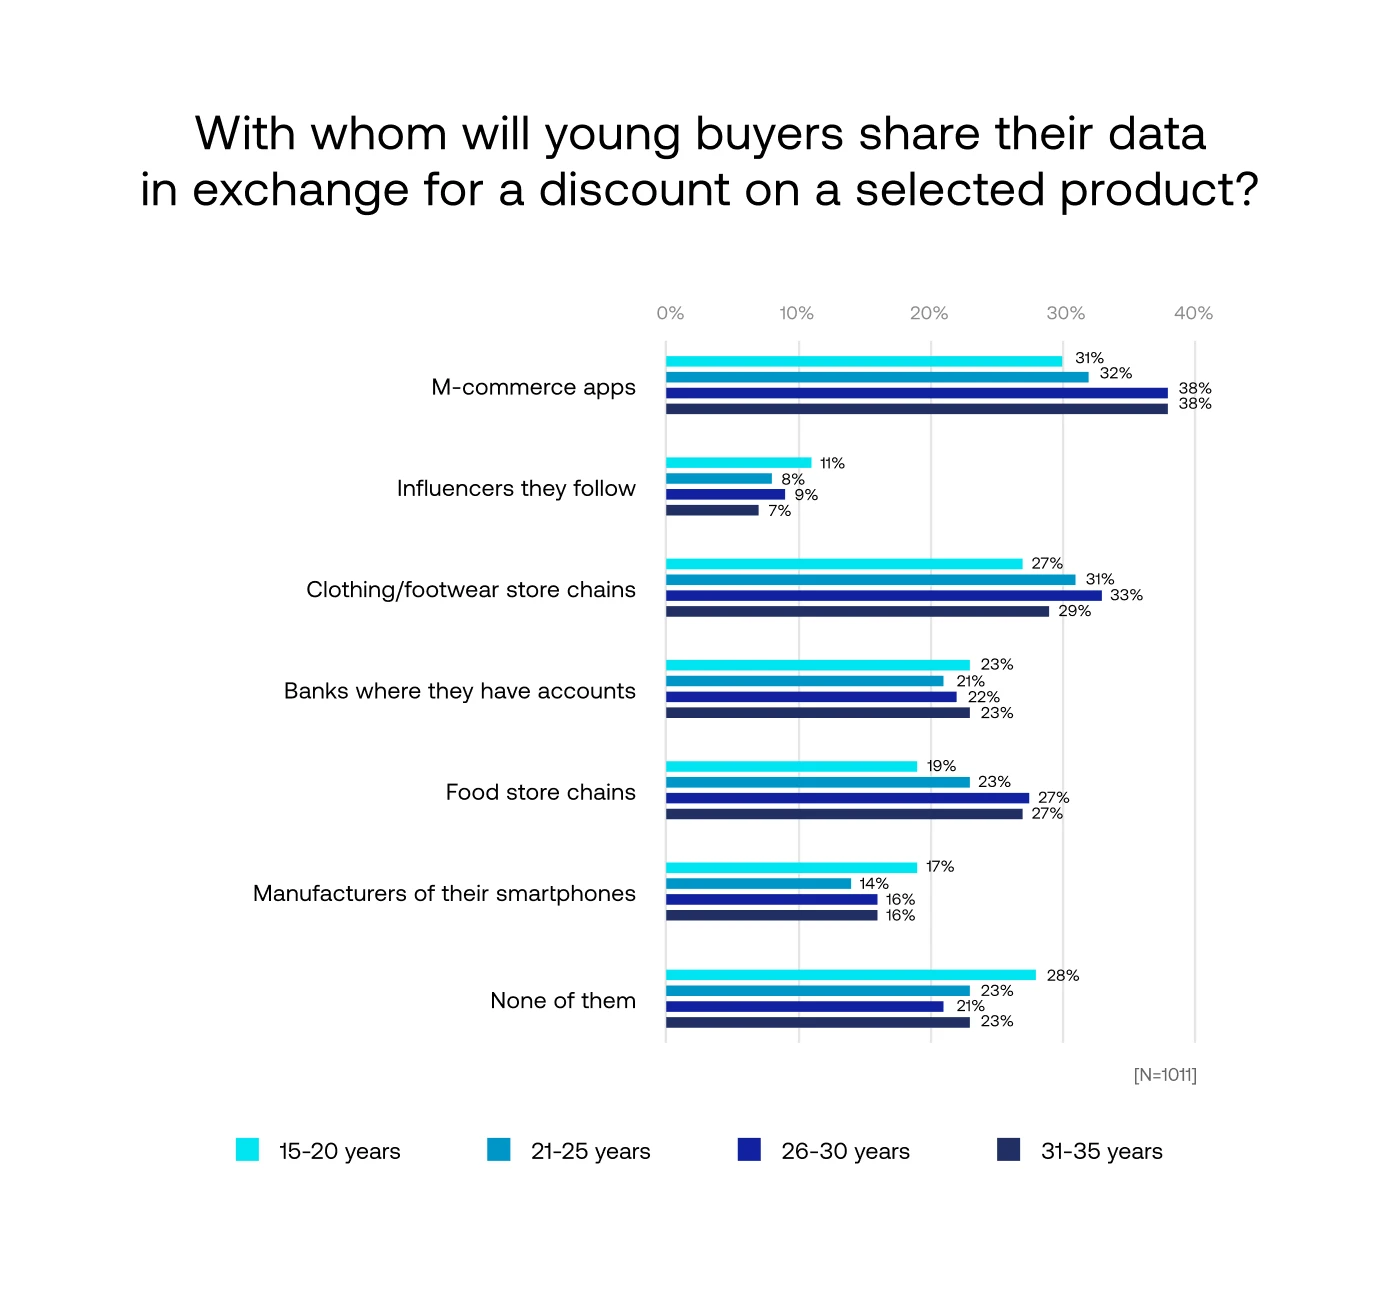 with whom will the young buyers share data